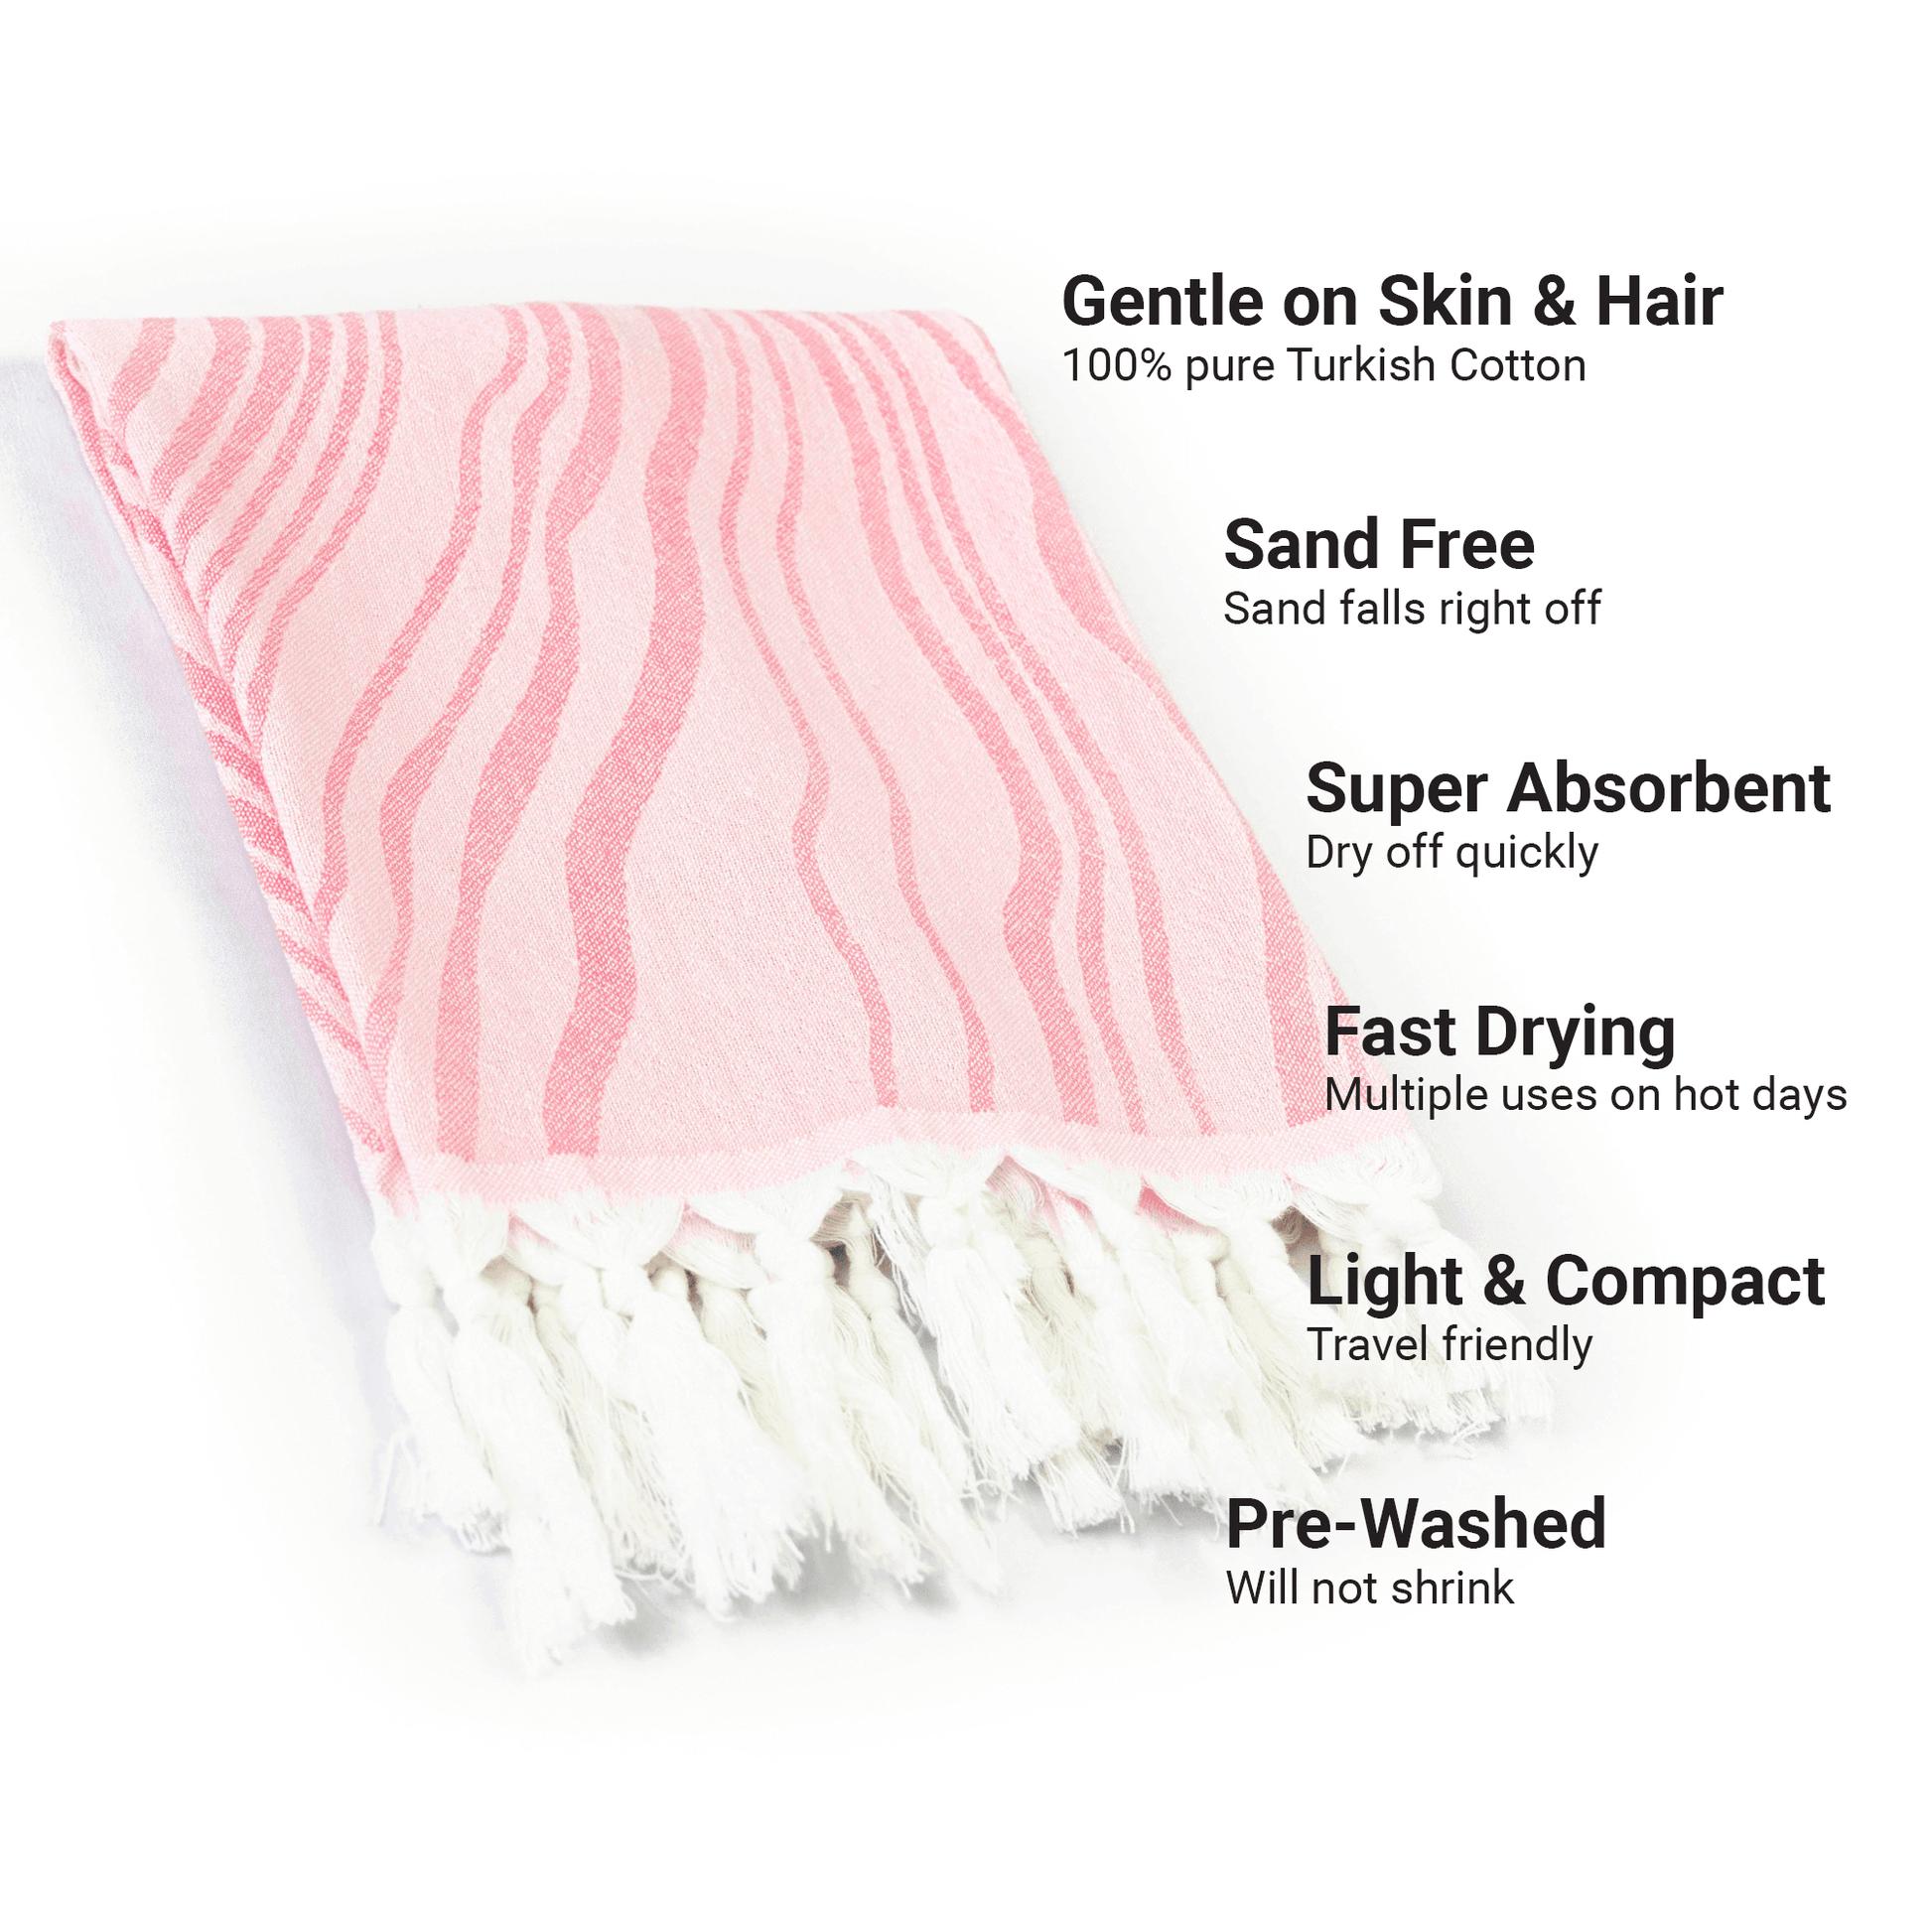 100% Cotton Multi striped Bath Towels Extra Soft & Absorbent Large Size  Towels.